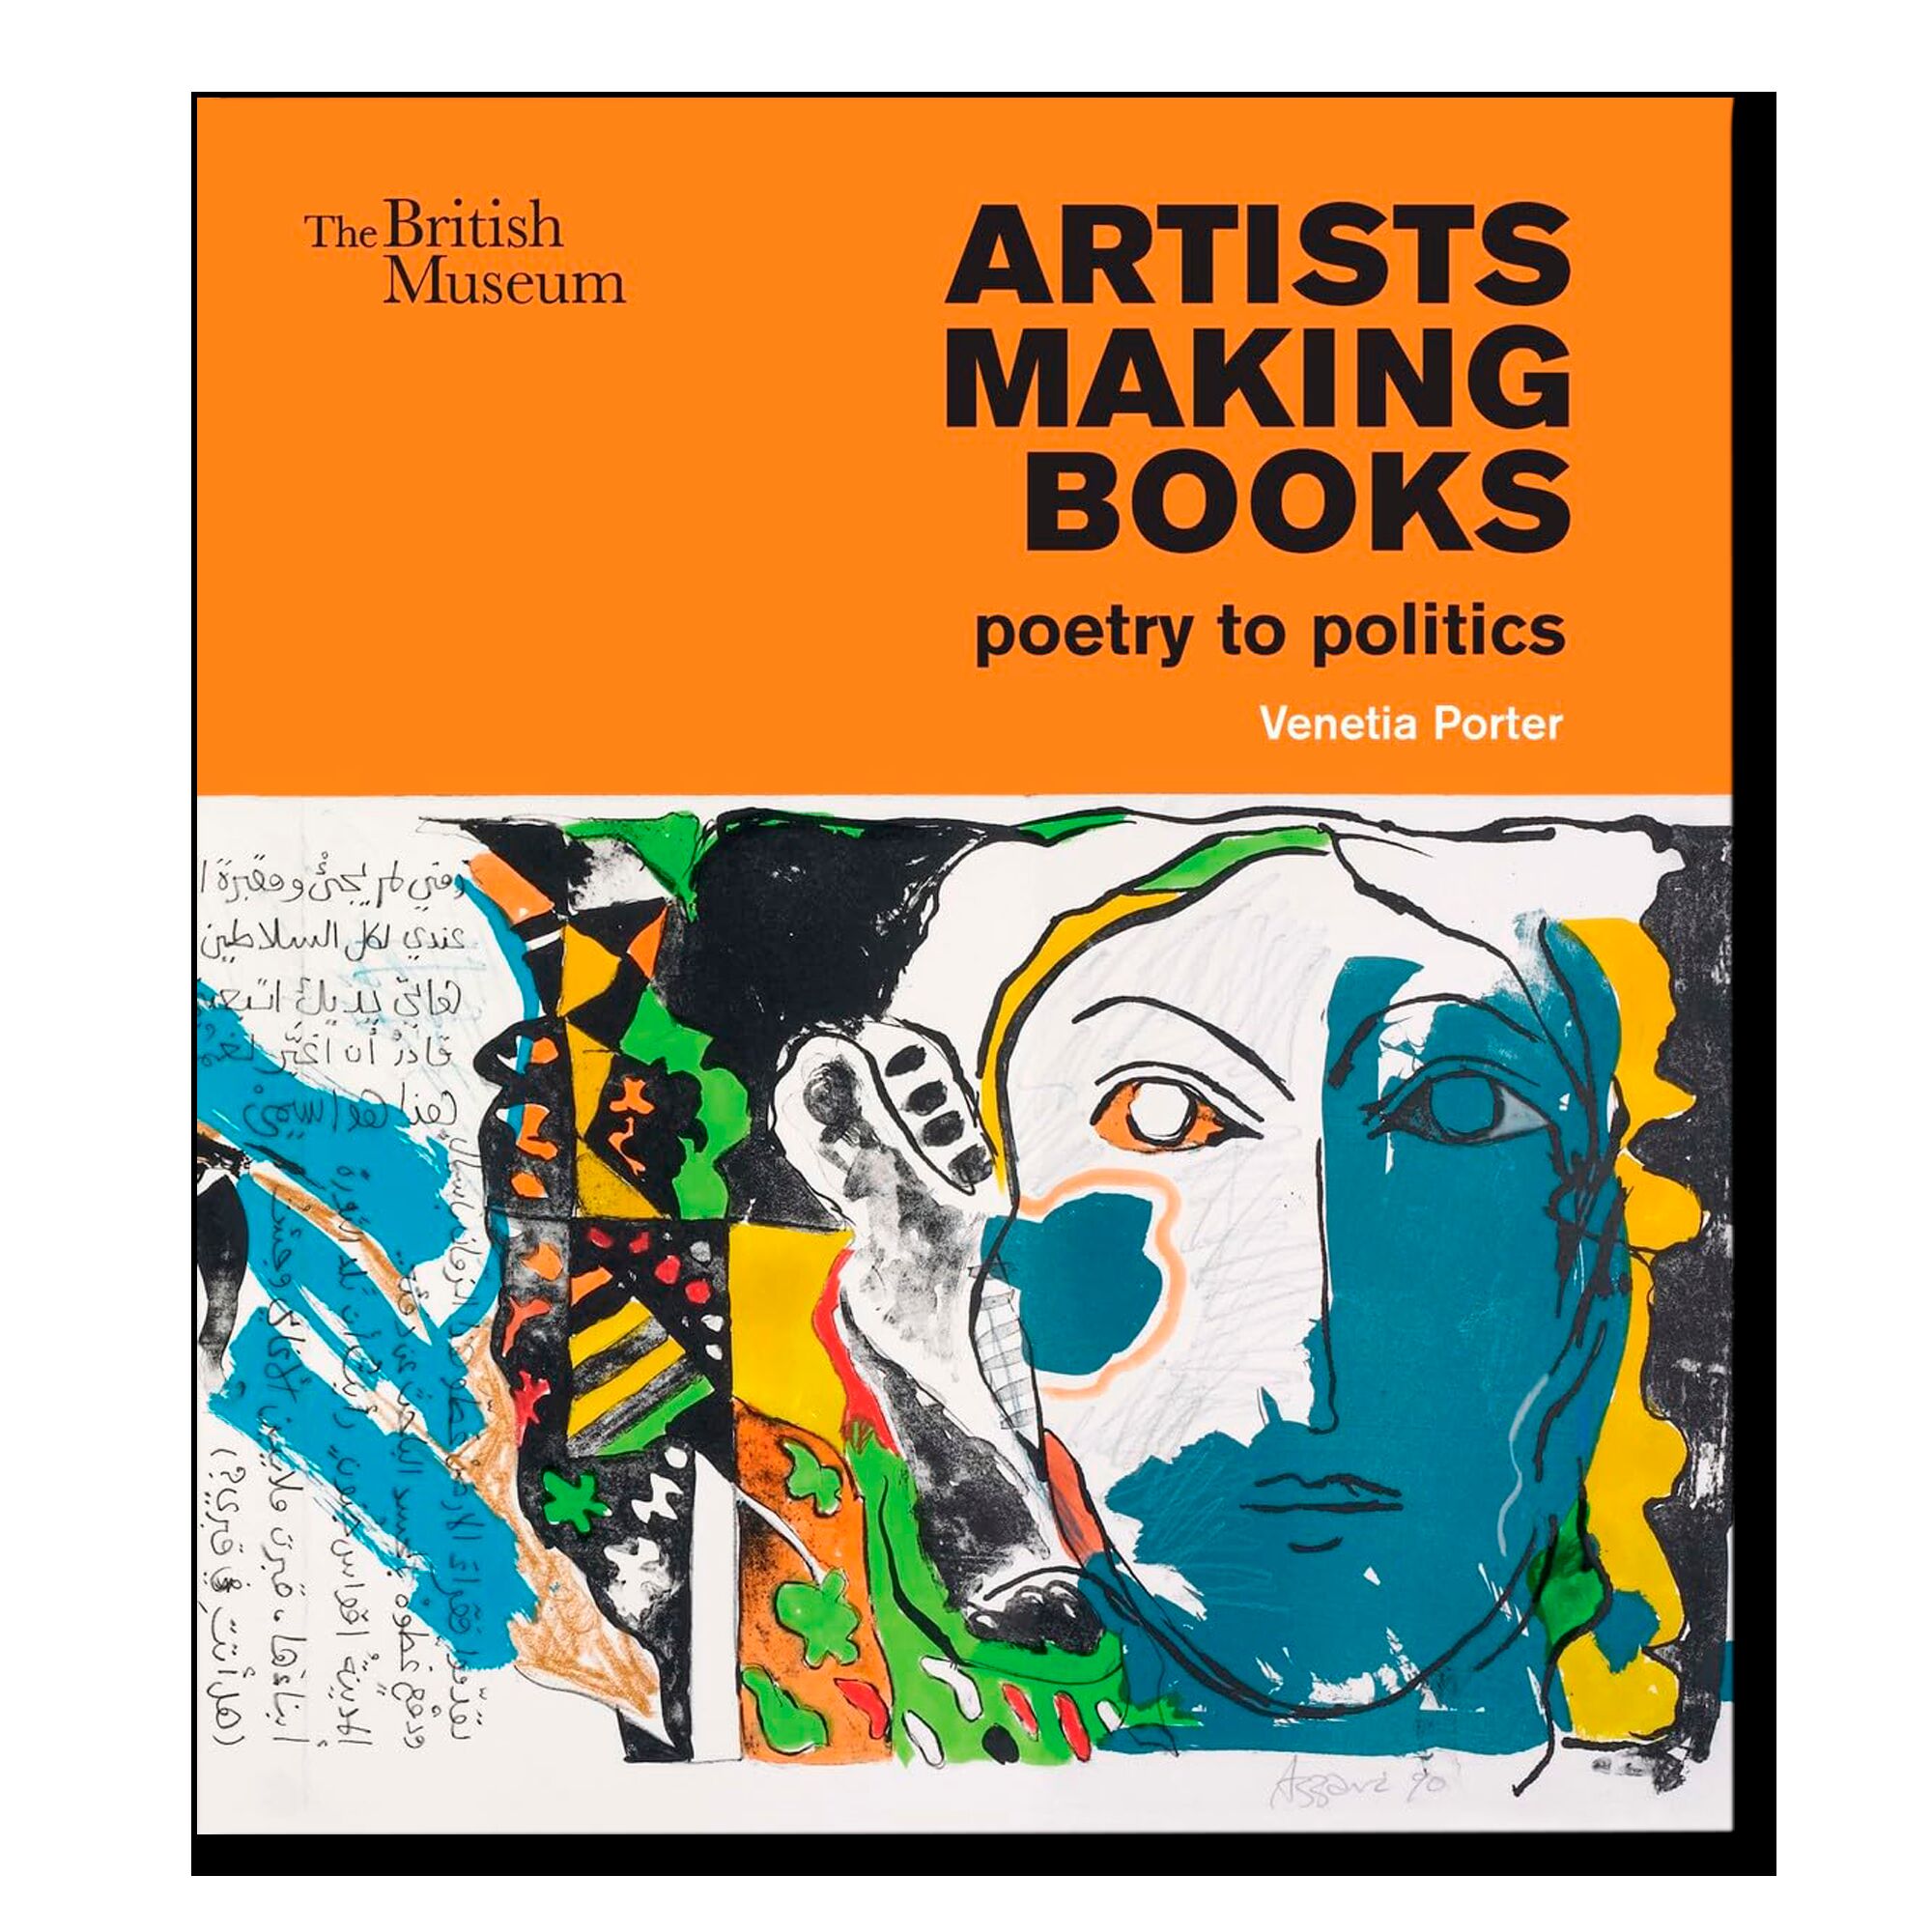 Artists Making Books: poetry to politics